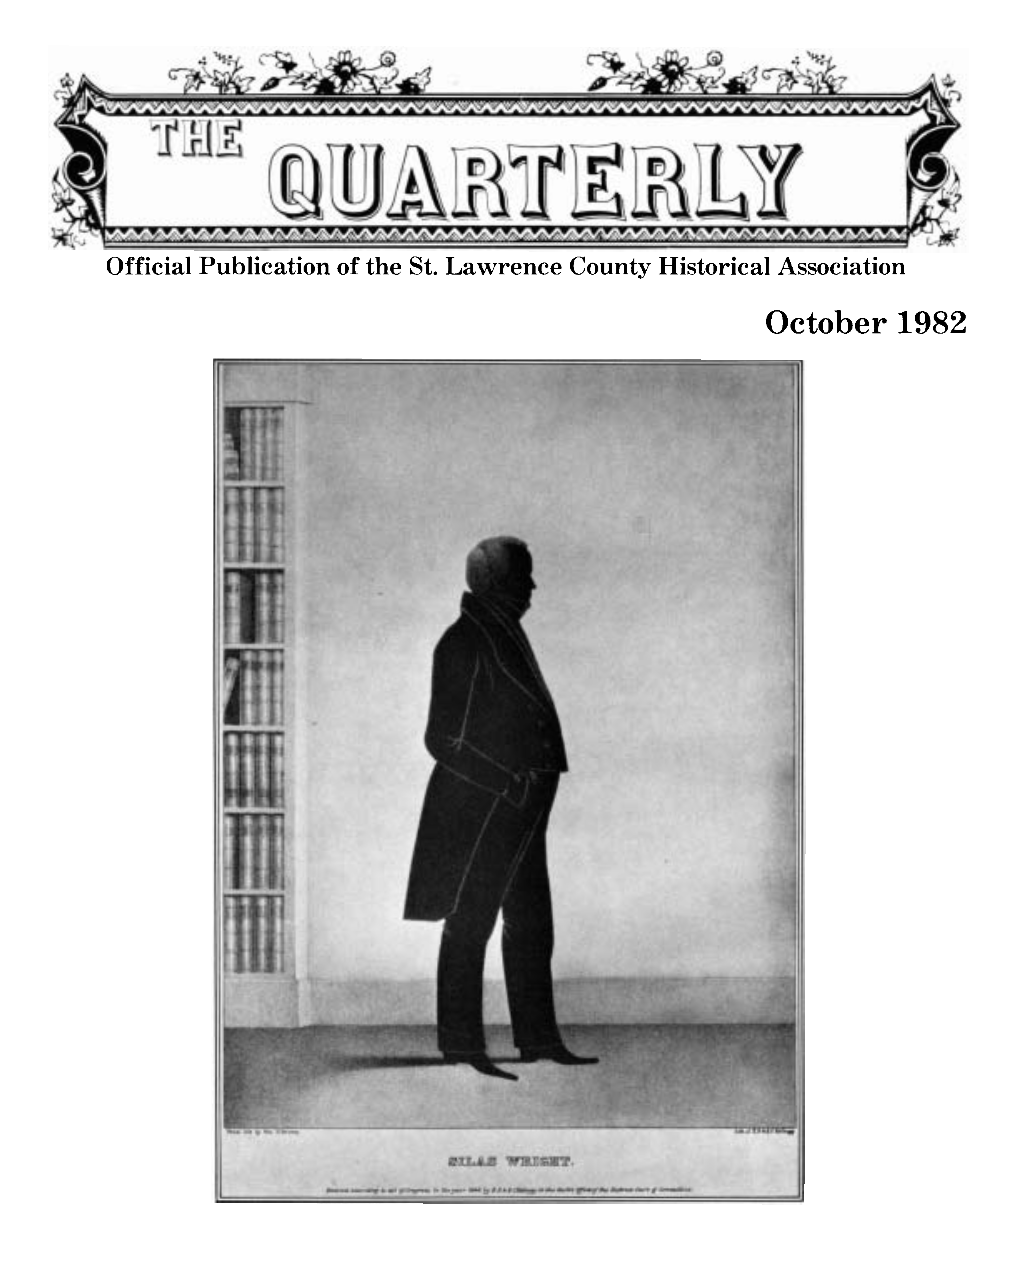 October 1982 the QUARTERLY Official Publication of the St